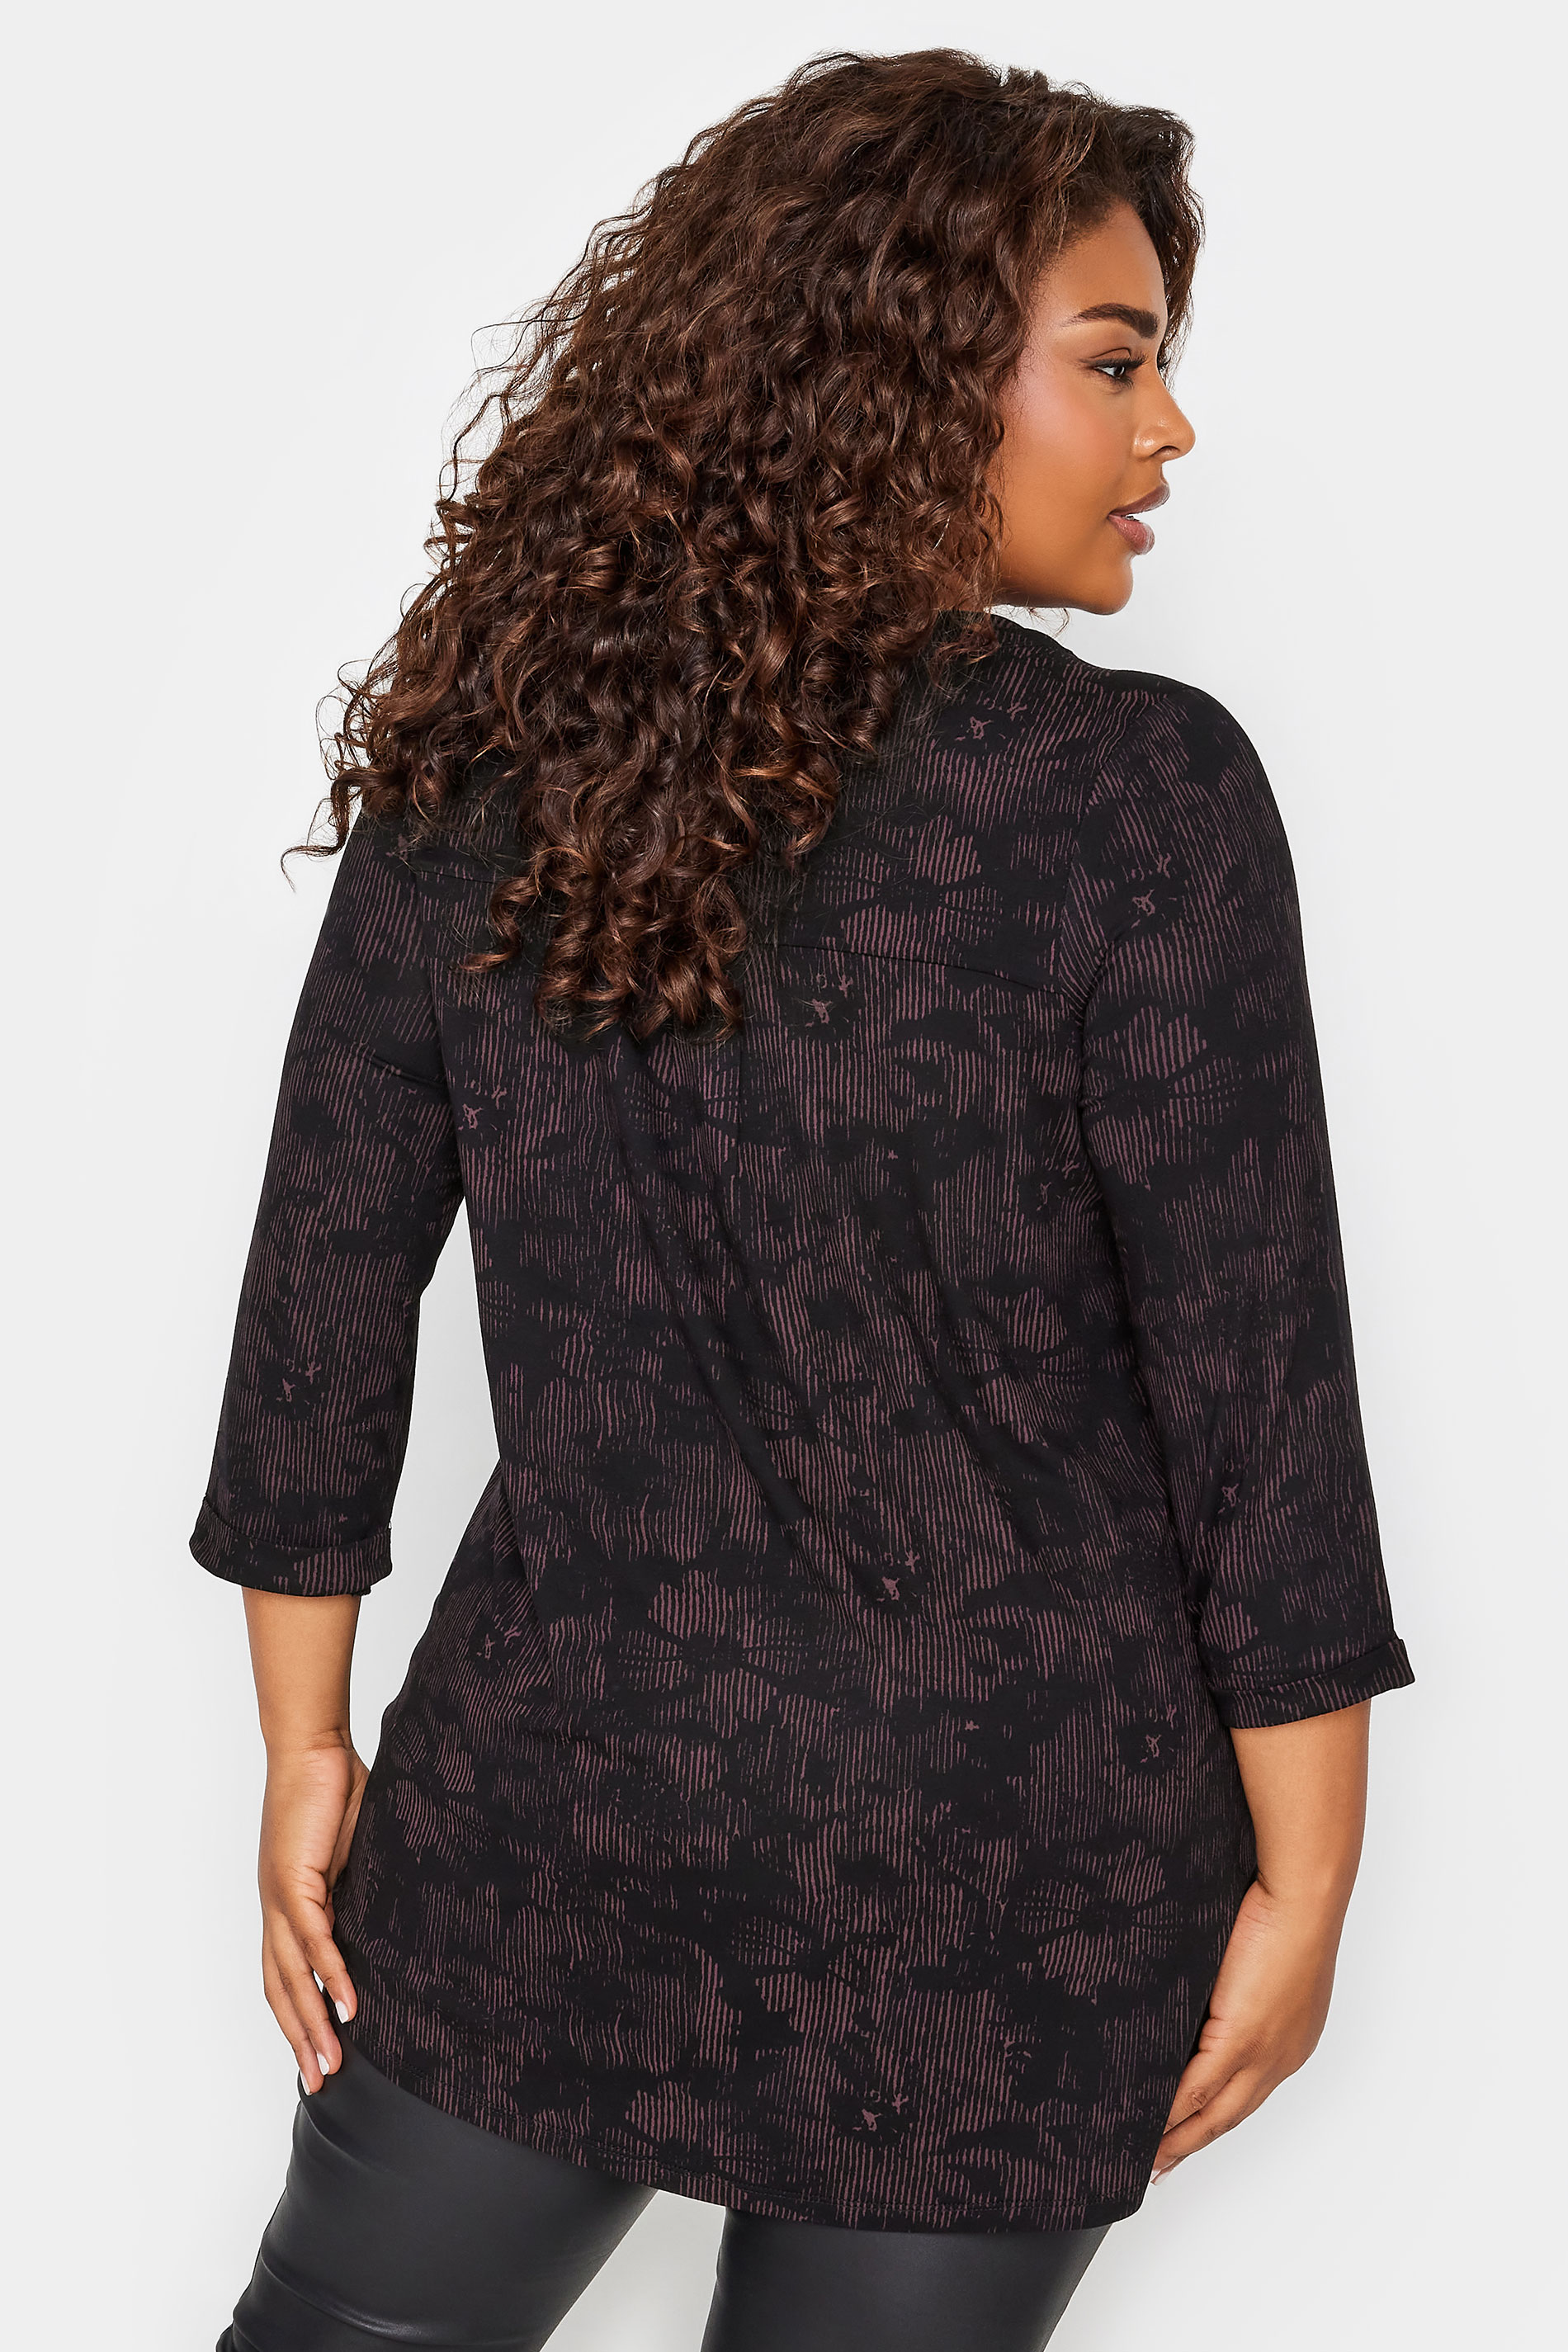 YOURS Plus Size Black Floral Print Jersey Shirt | Yours Clothing 3